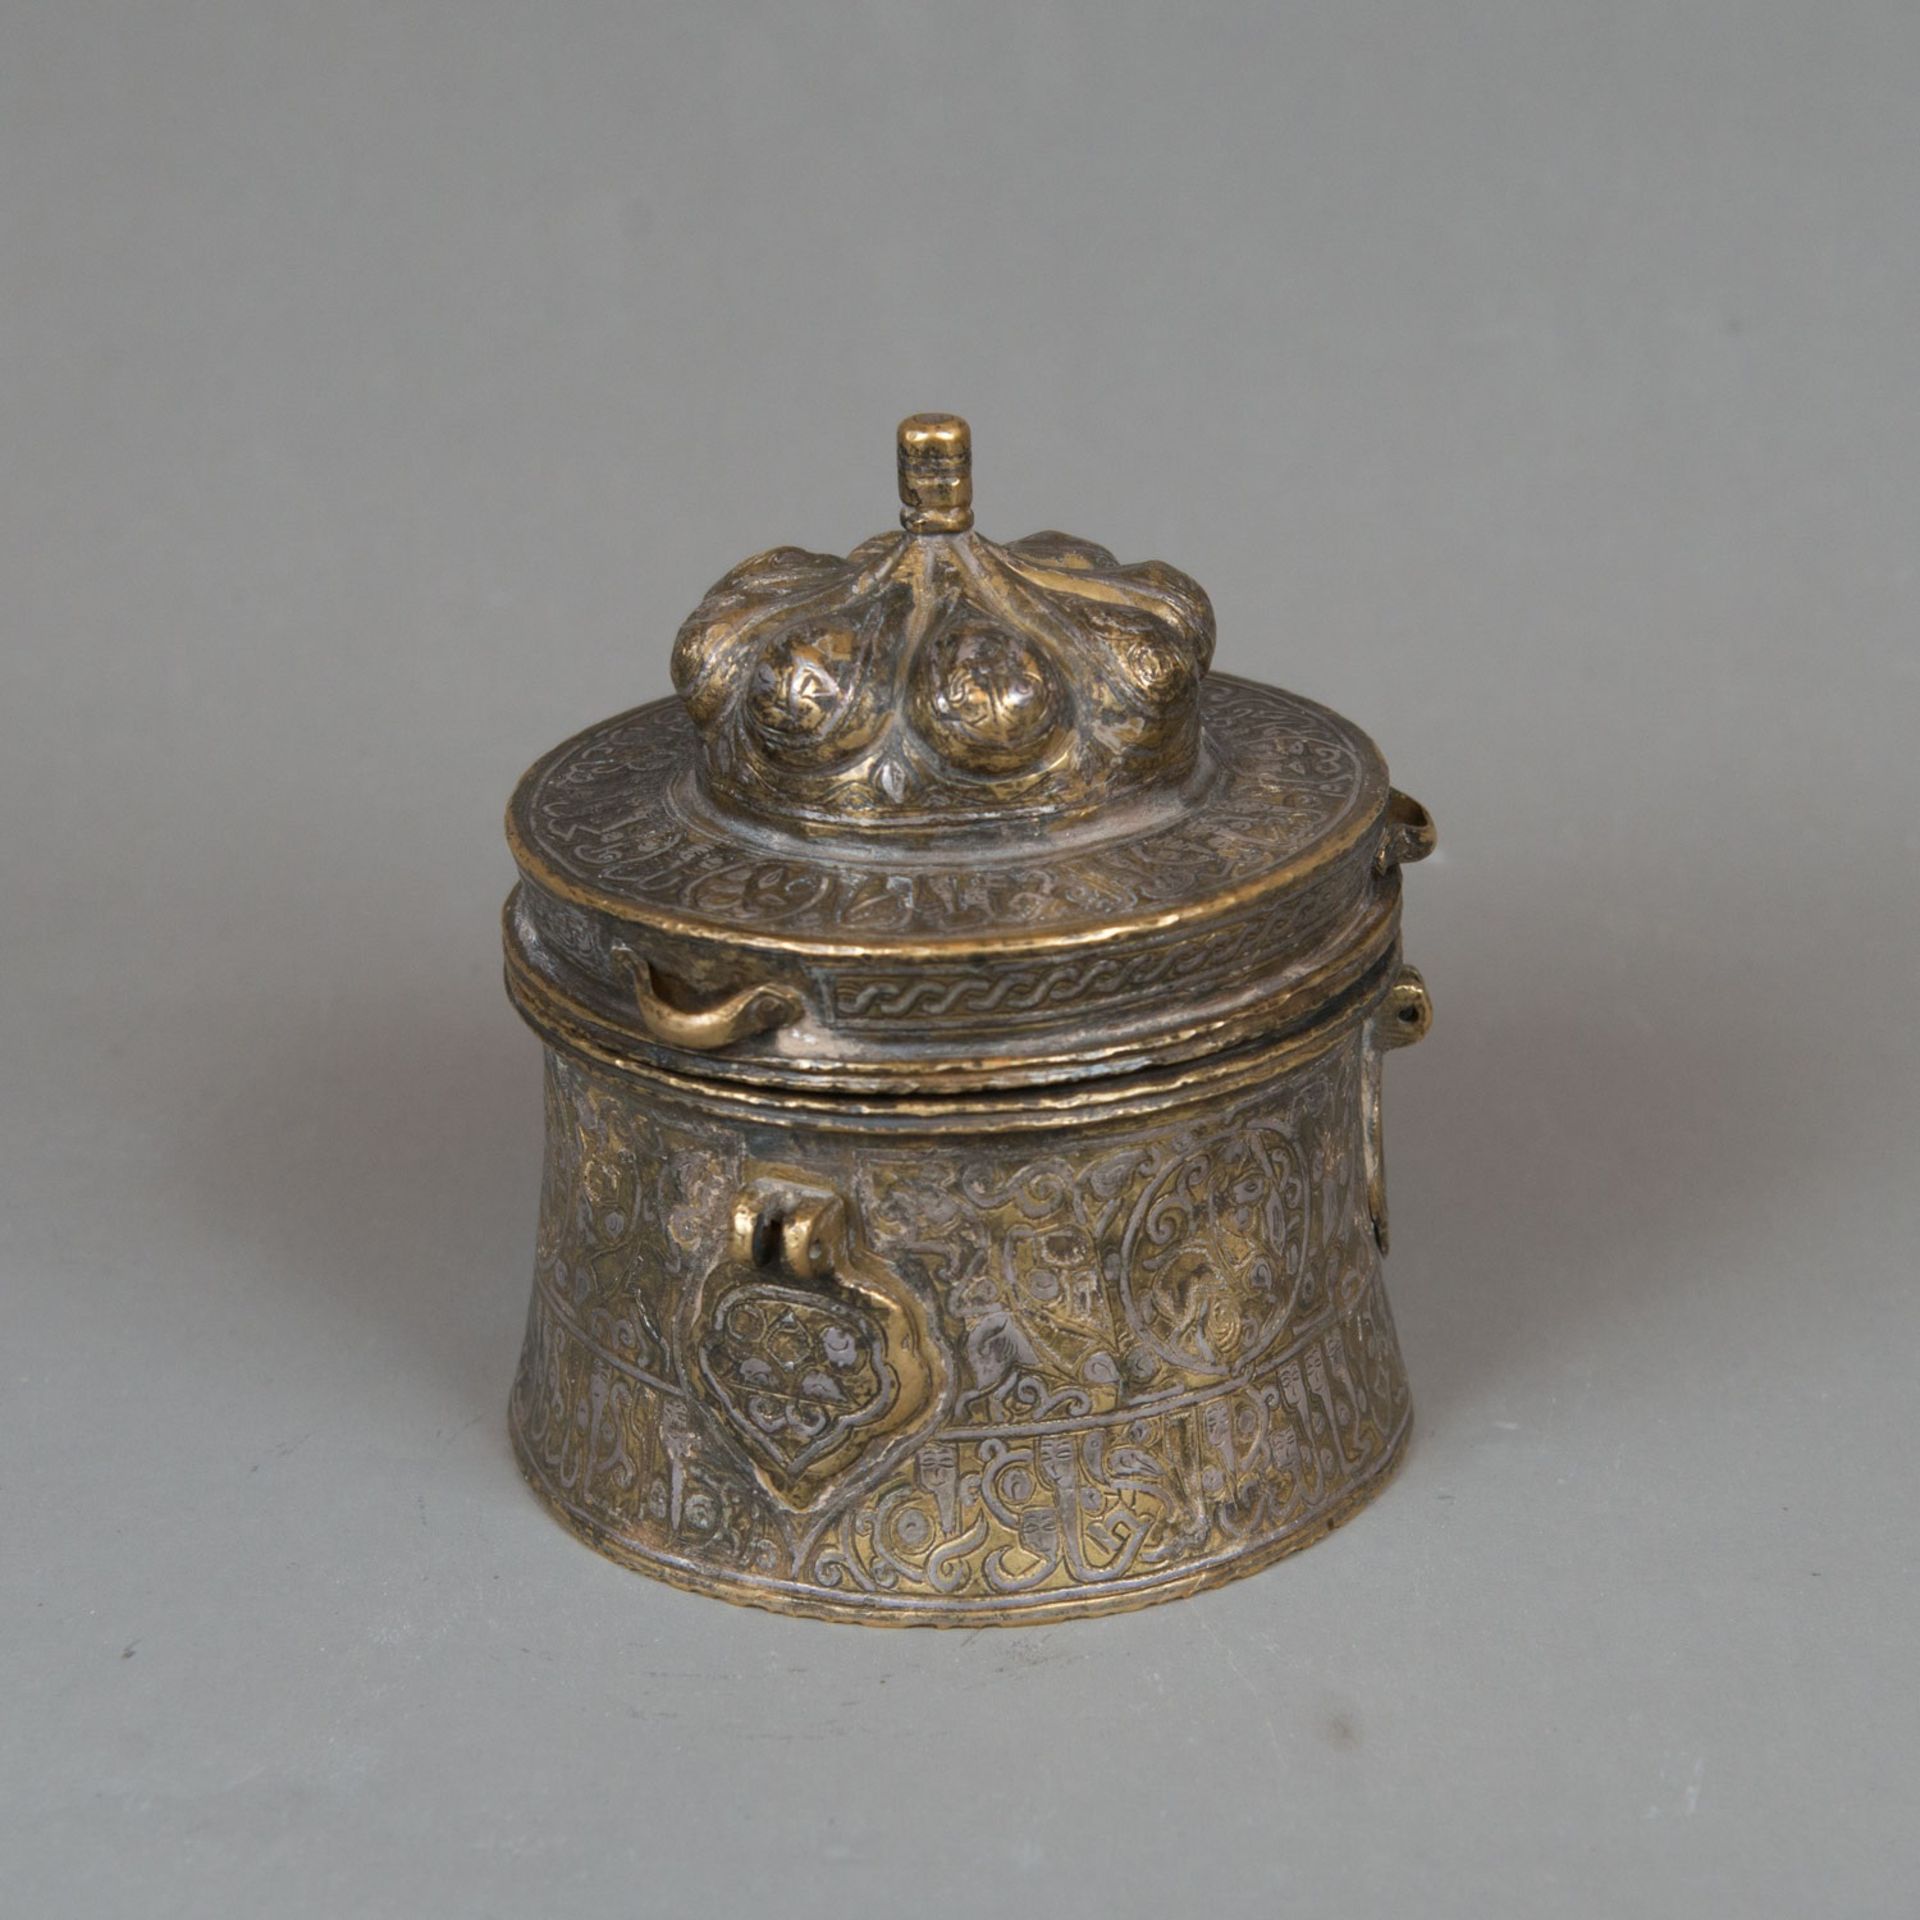 Khorasan Container - Image 2 of 3